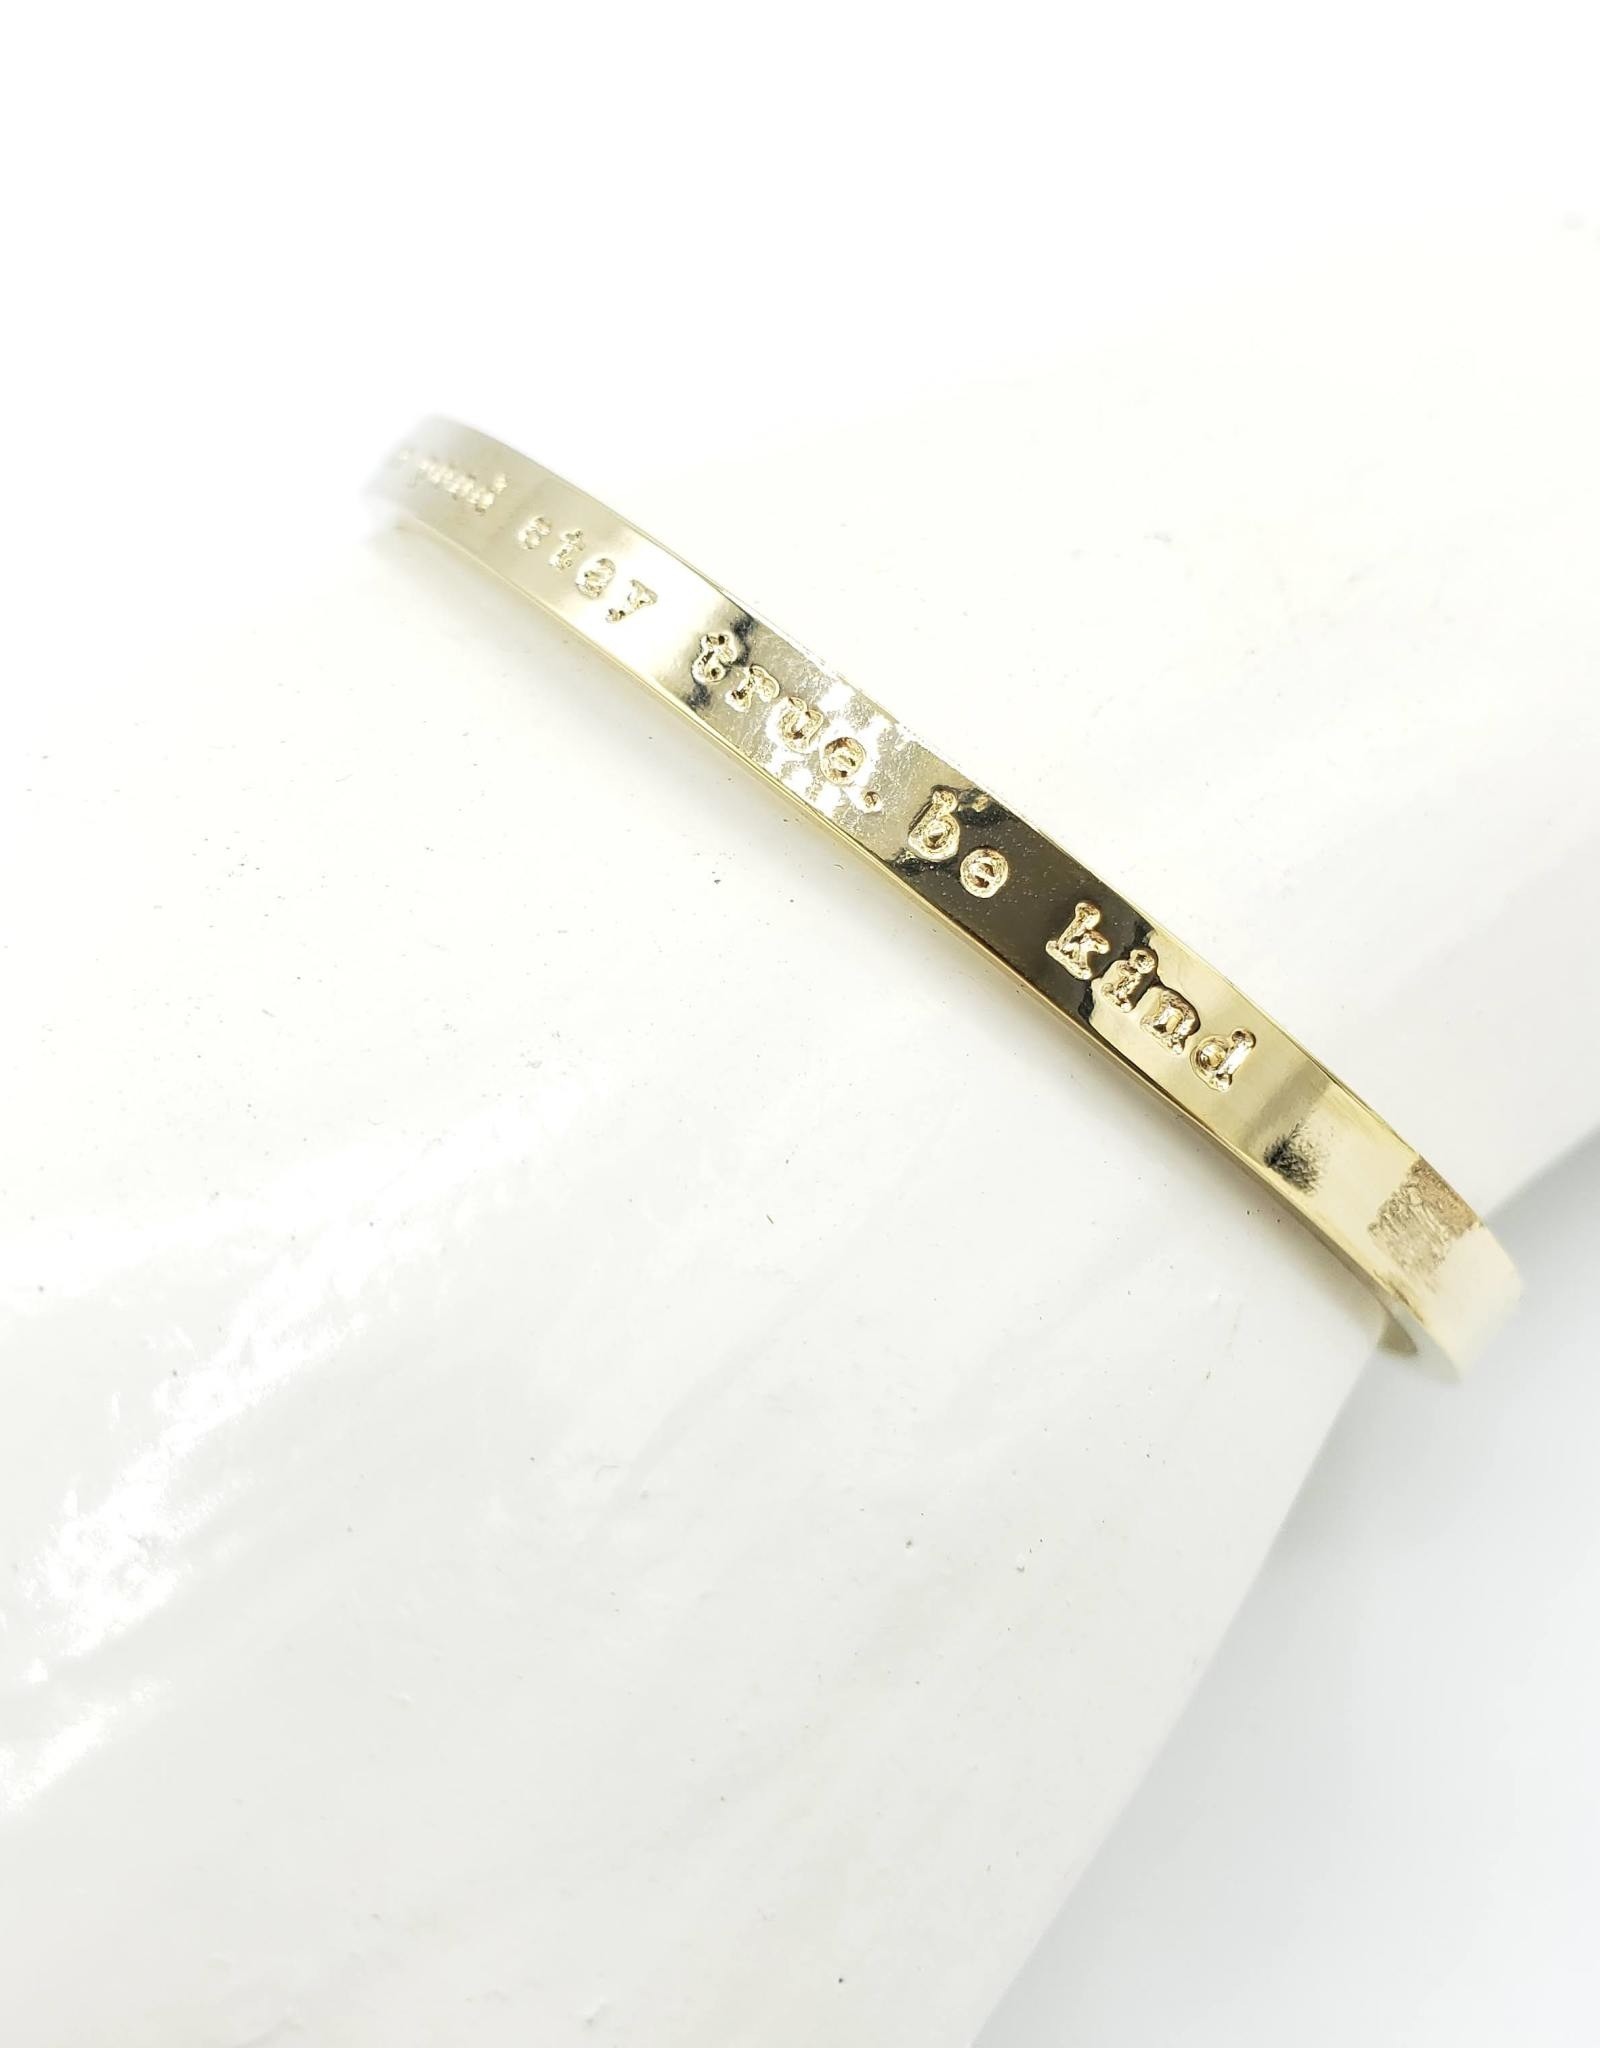 Oh, Hello Friend "slow down. pursue good. stay true. be kind" Cuff Bracelet, Gold Plated